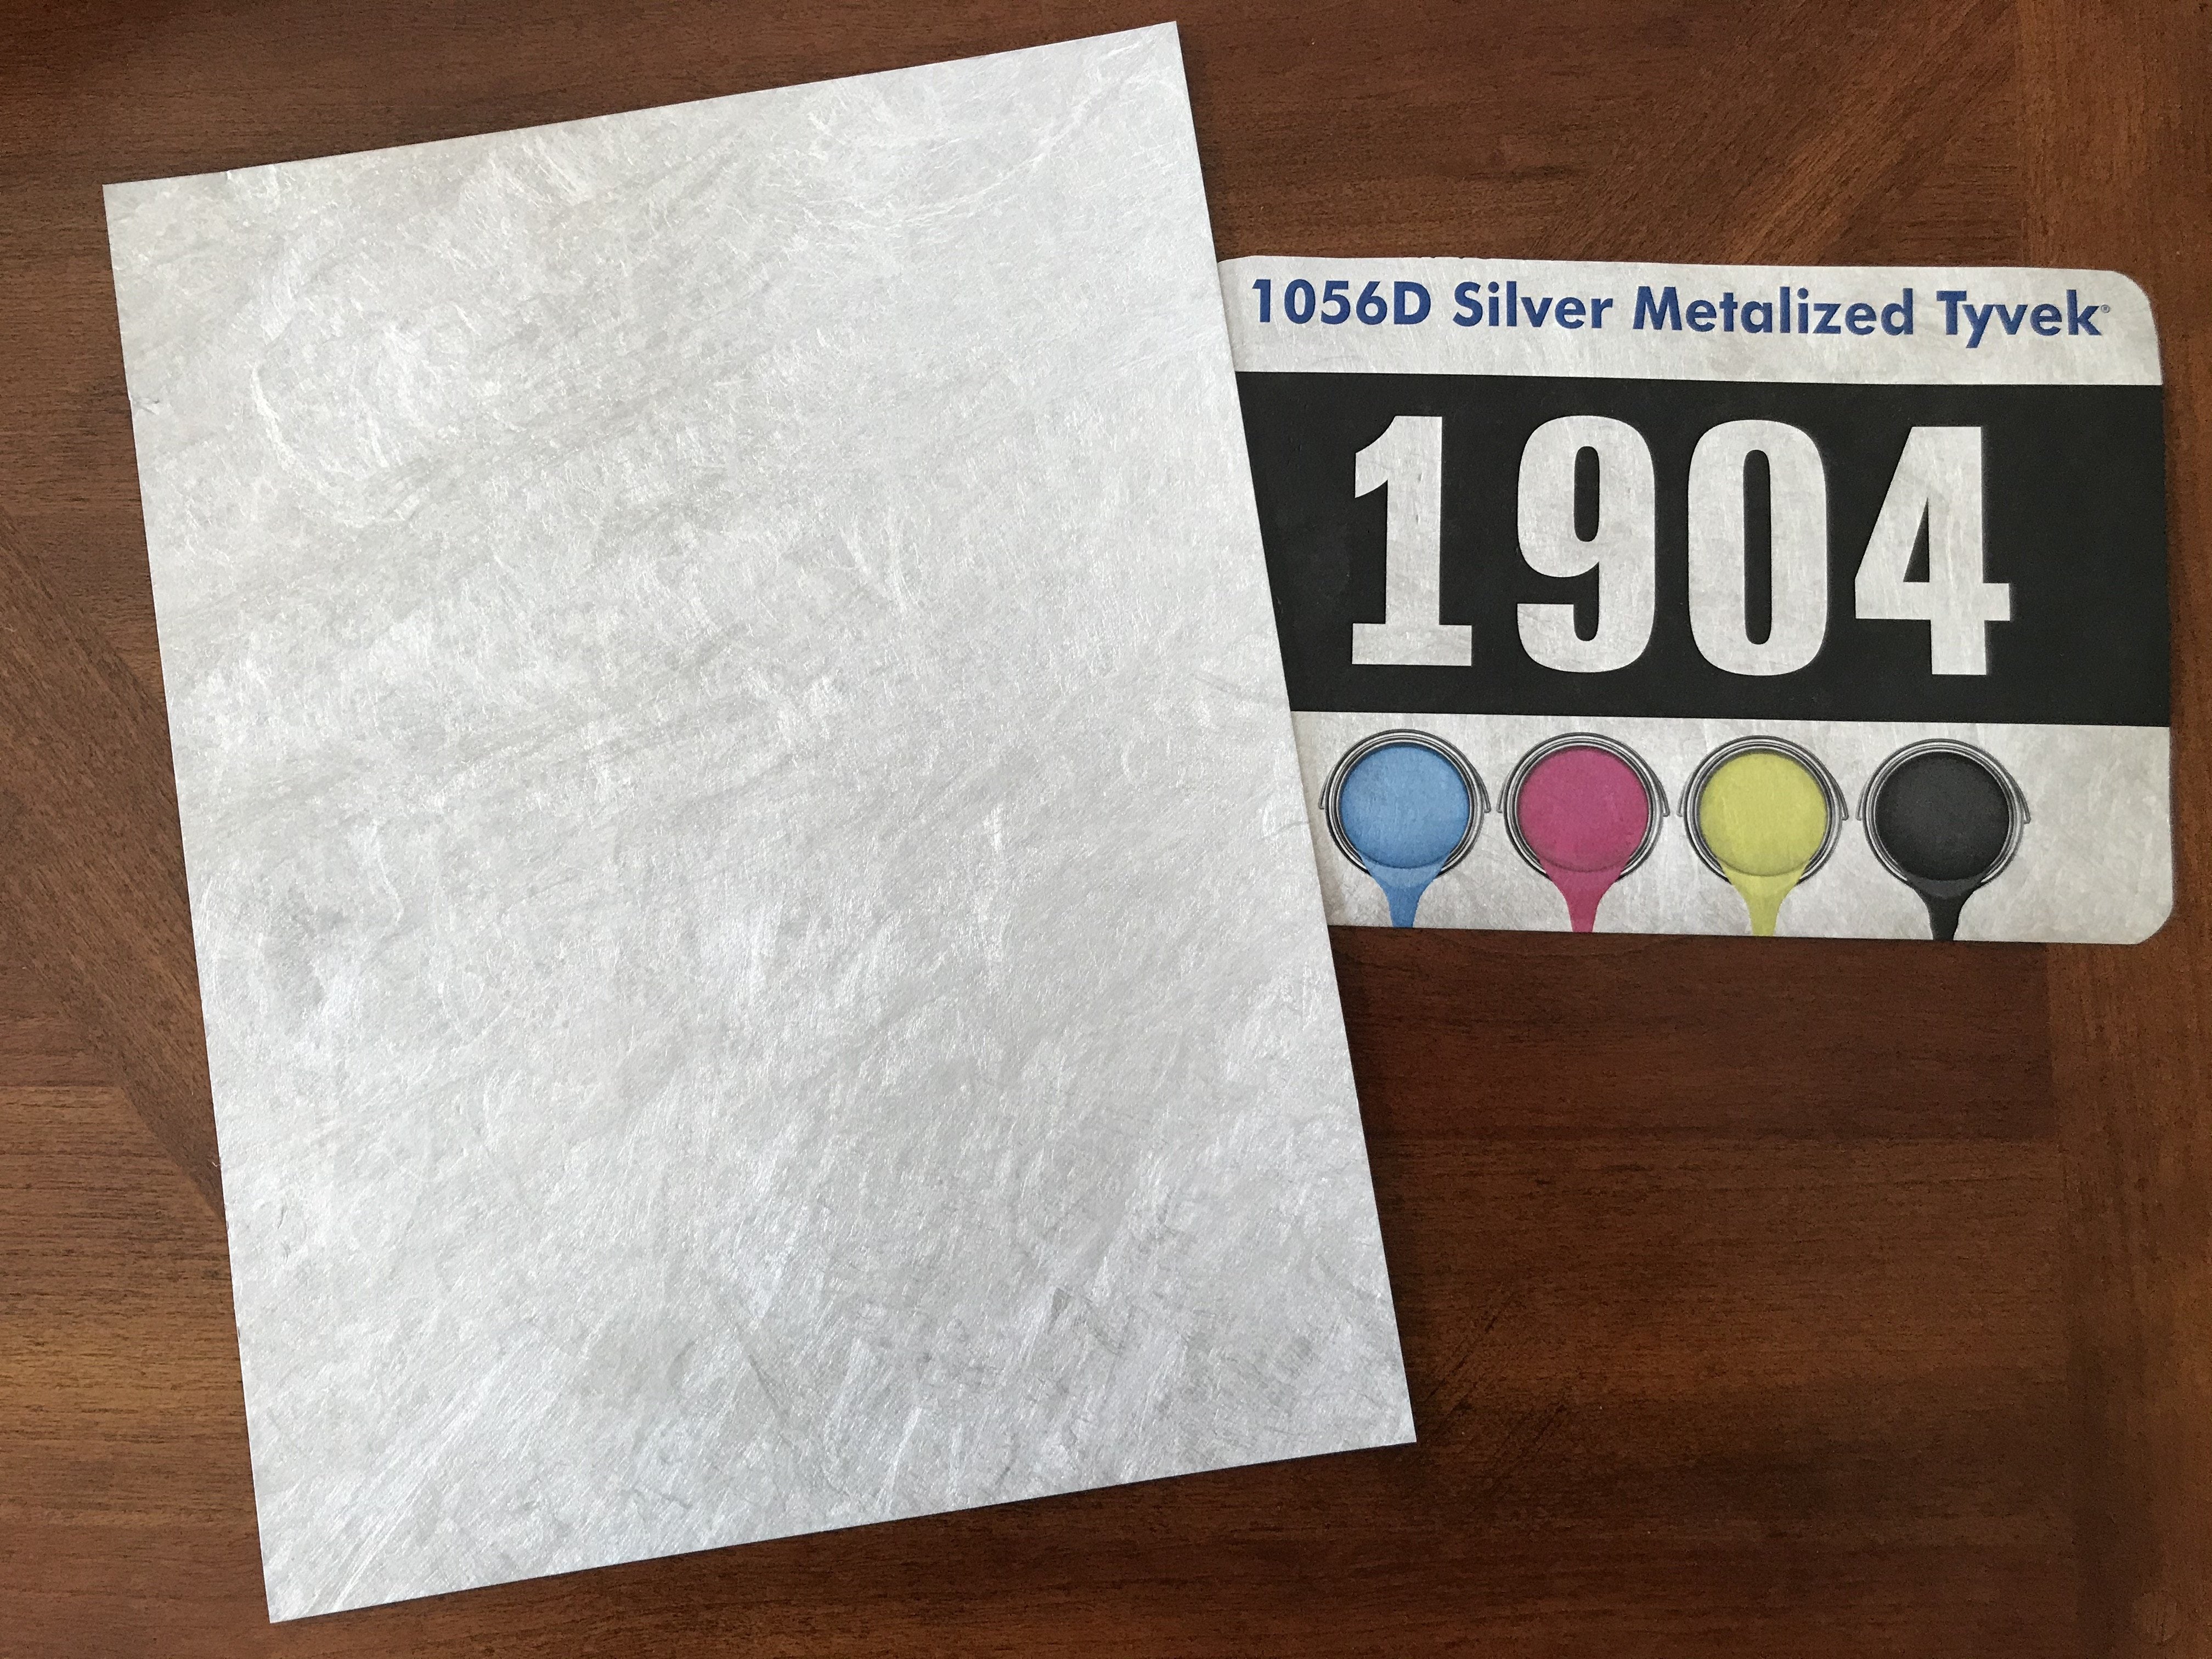 Silver Metalized Tyvek for printing and crafts